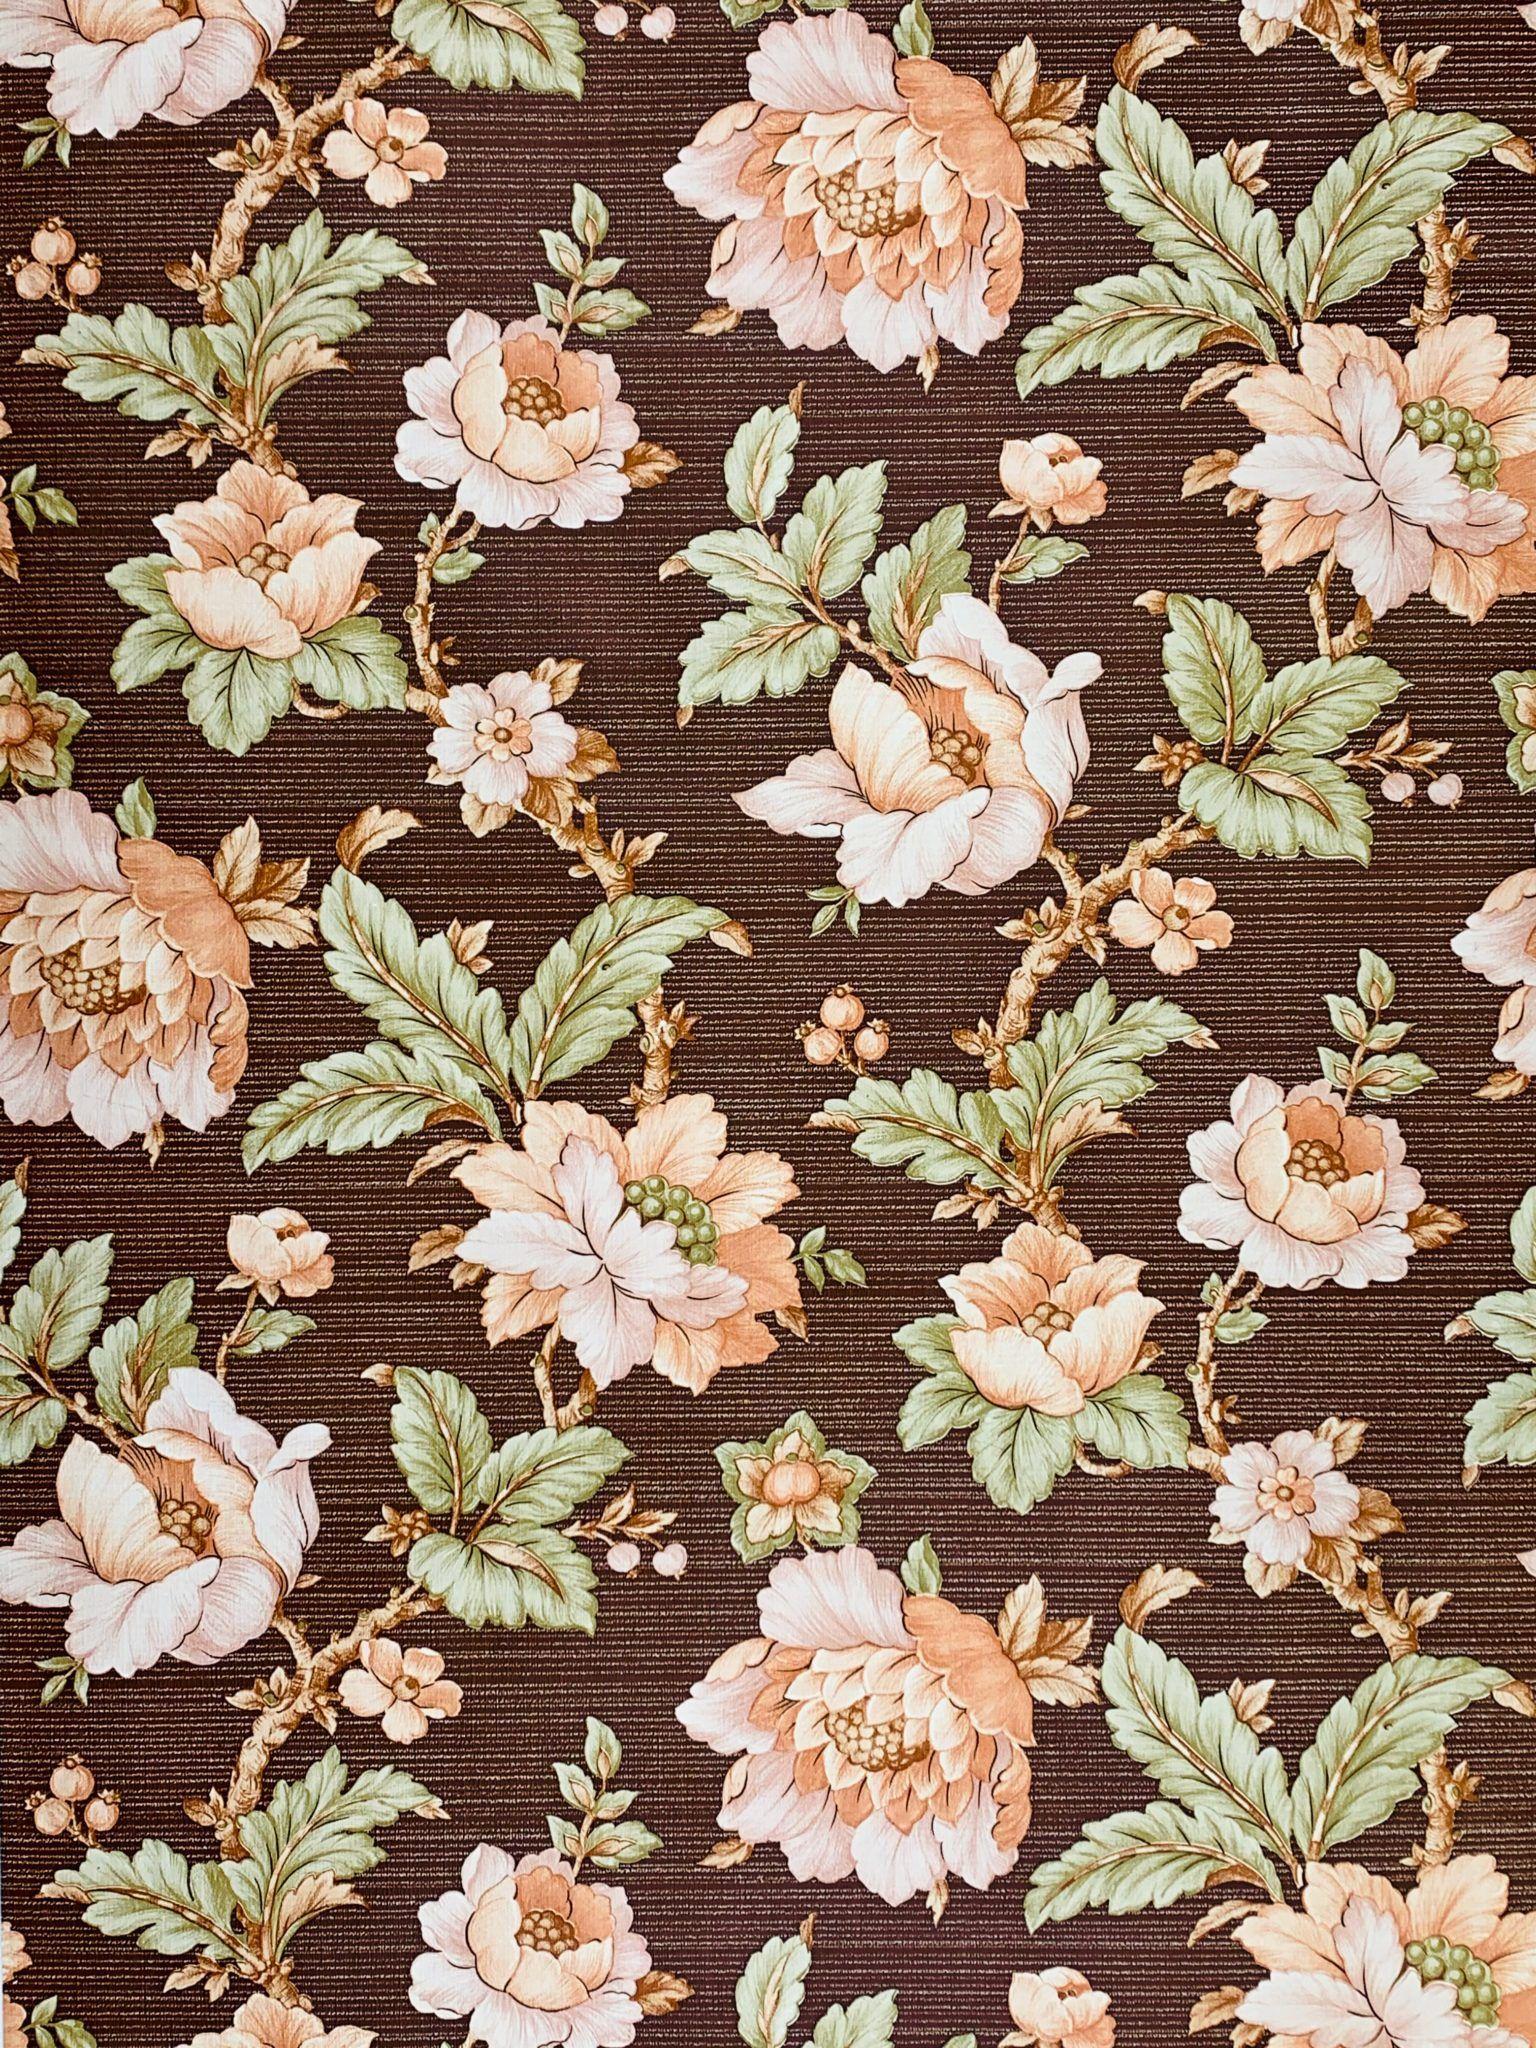 Multicolored Flower Design Wallpaper  Designer Pick Wallpaper  Blooming Floral  Wallpaper  Modern Look with Ethnic Touch 50 Square Foot Brown   Amazonin Home Improvement